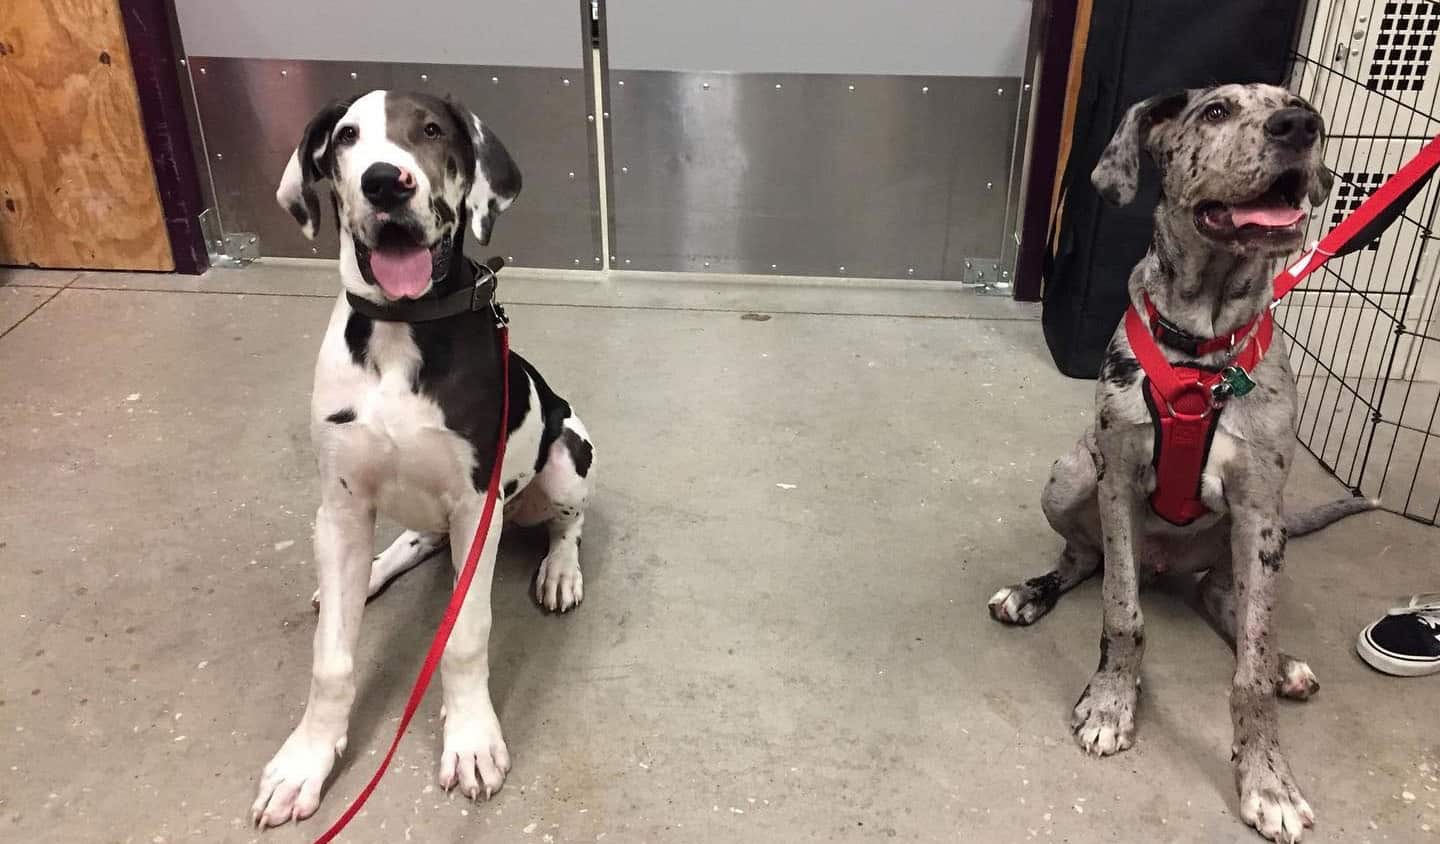 Two Great Dane dogs both 5 months old